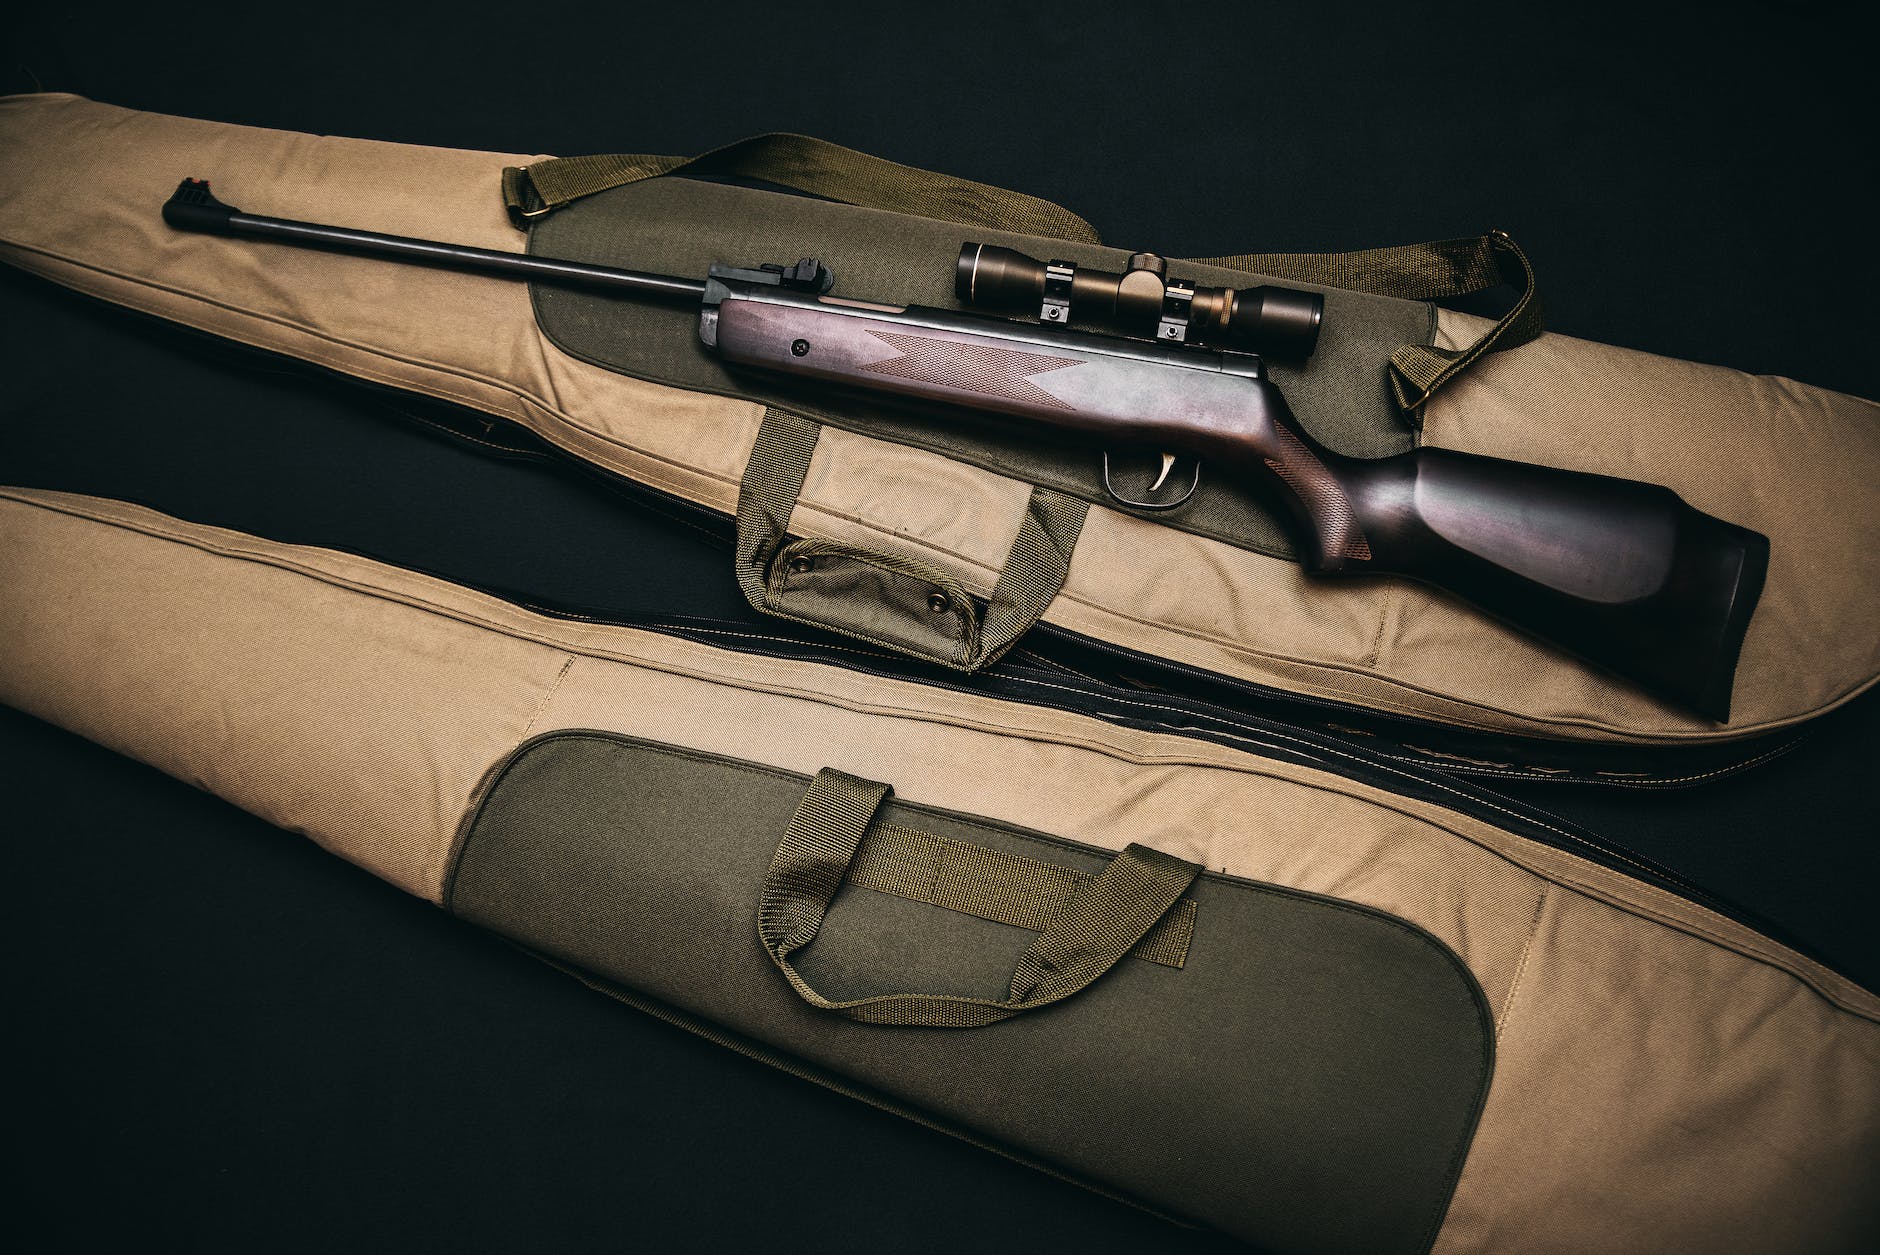 black rifle with scope and brown gig bag (Photo by Alex Andrews)